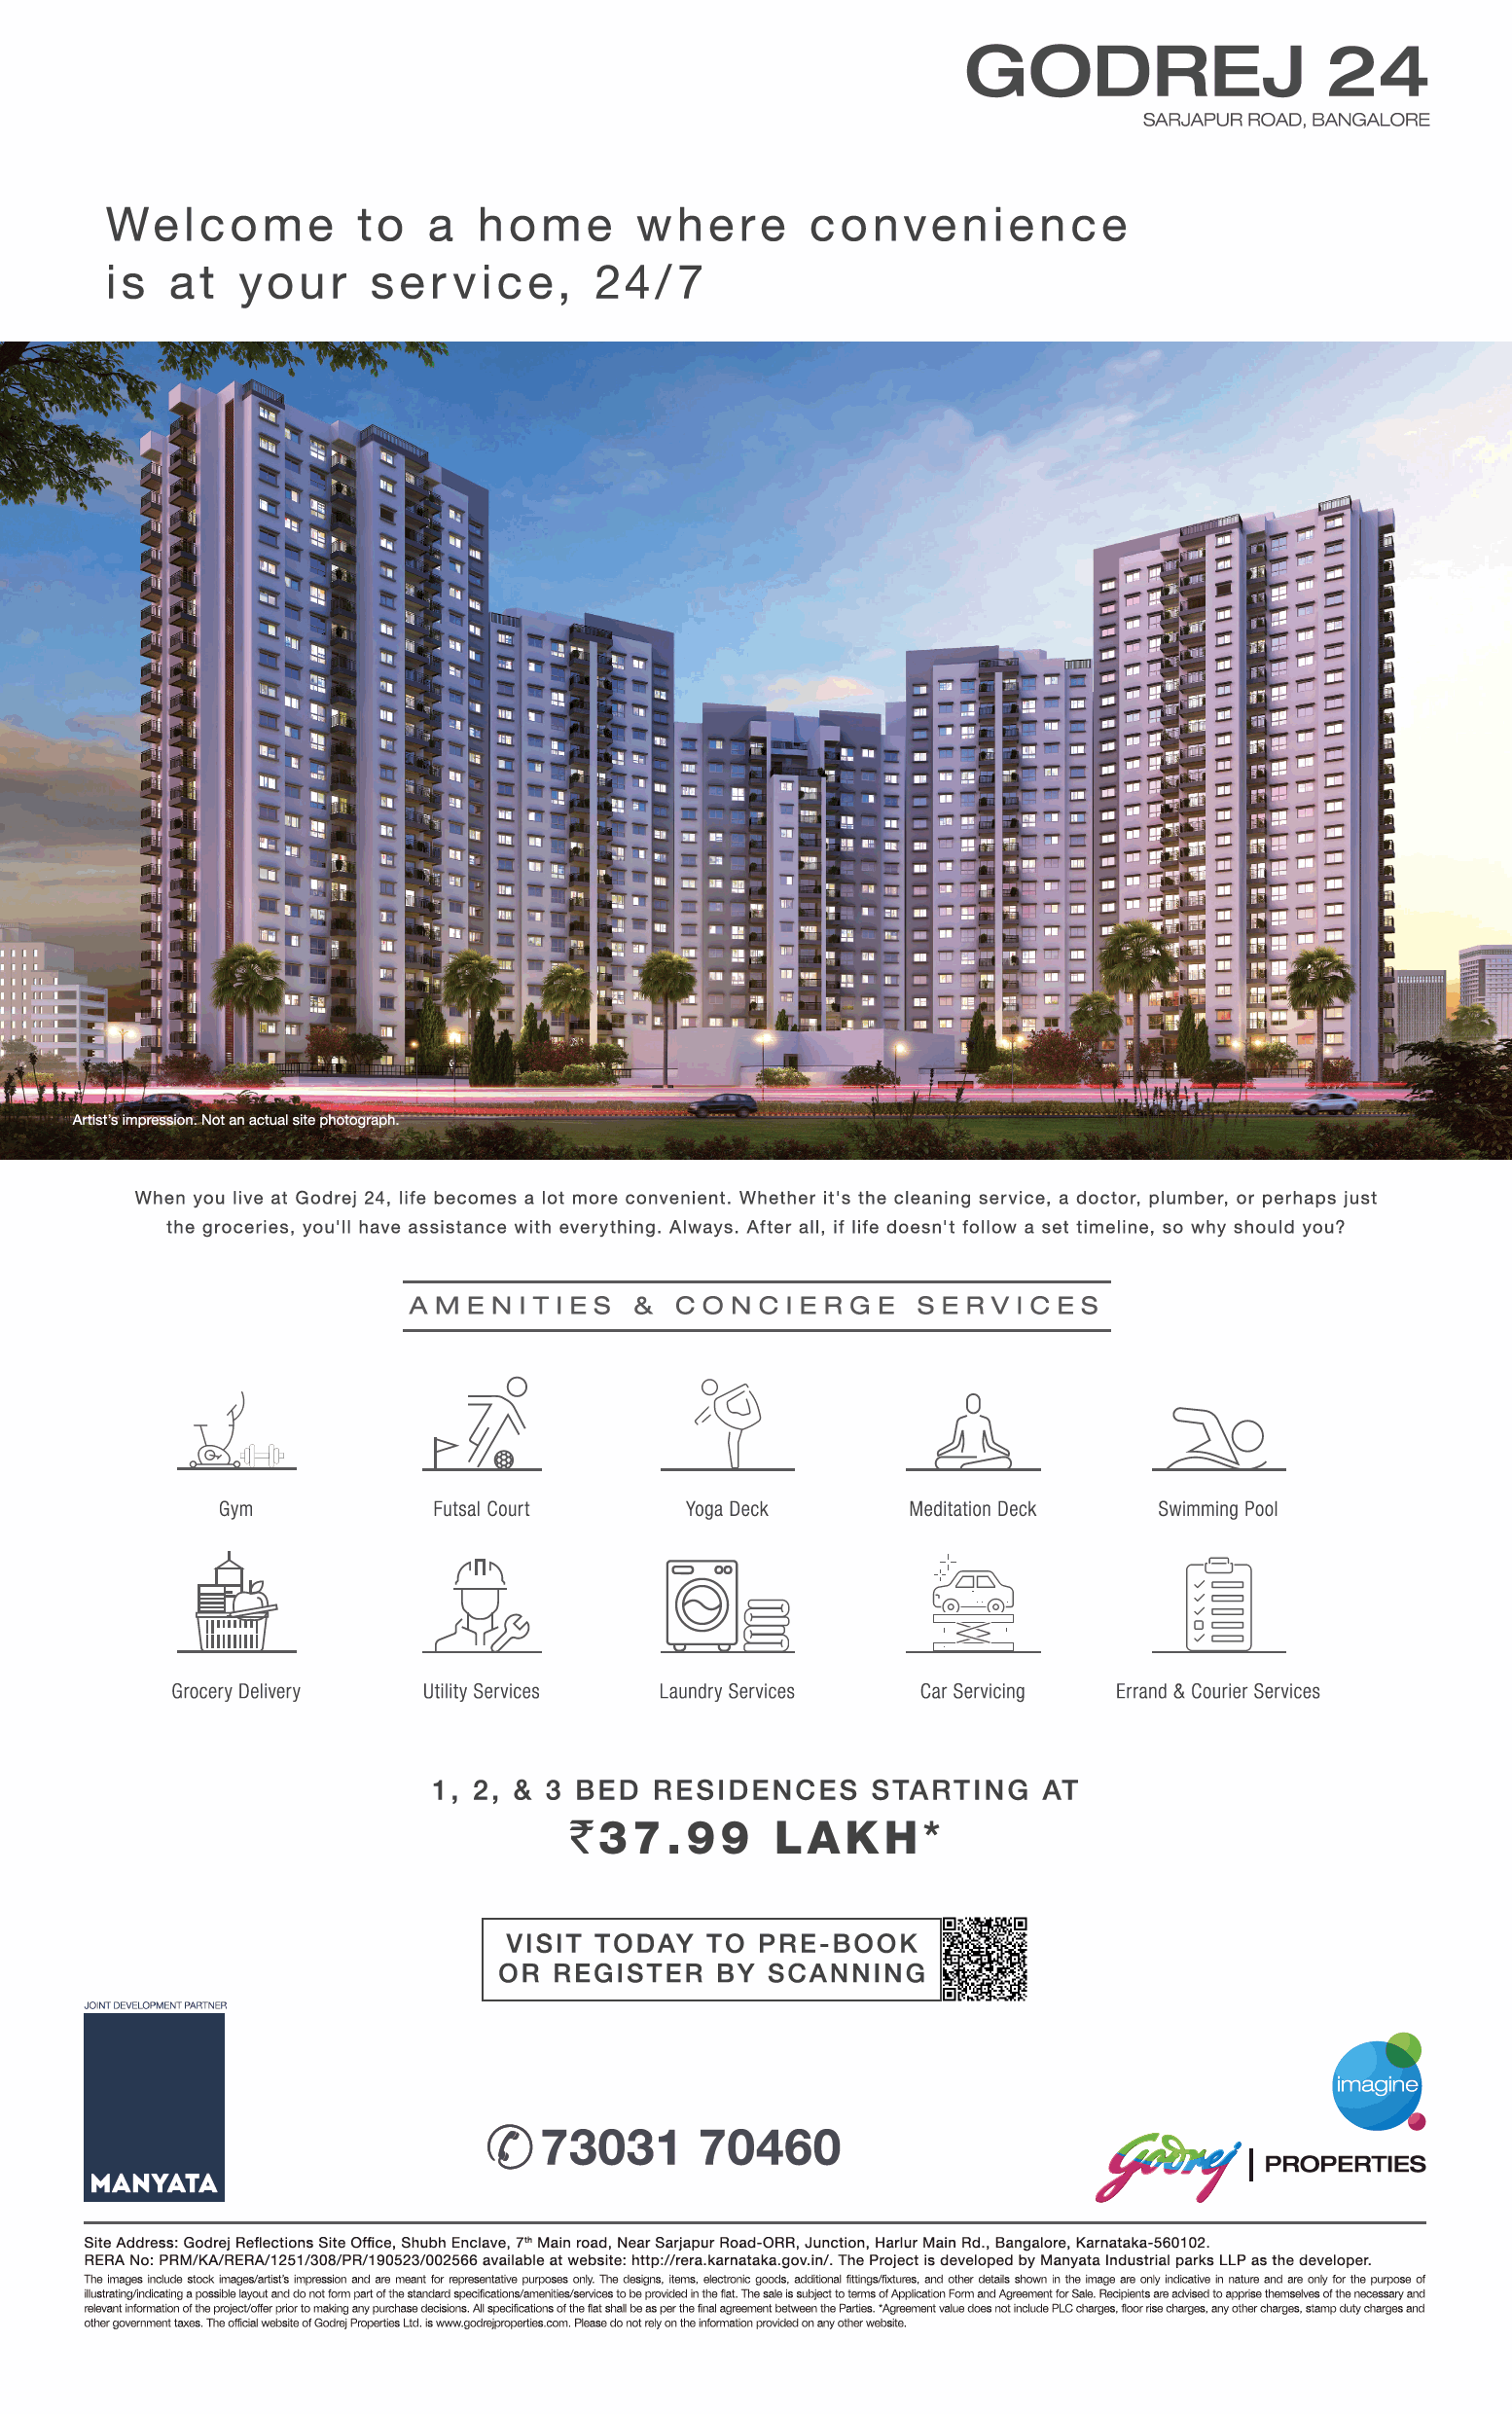 godrej-properties-1-2-and-3-bed-residences-starting-at-rs-37.99-lakh-ad-bangalore-times-31-08-2019.png